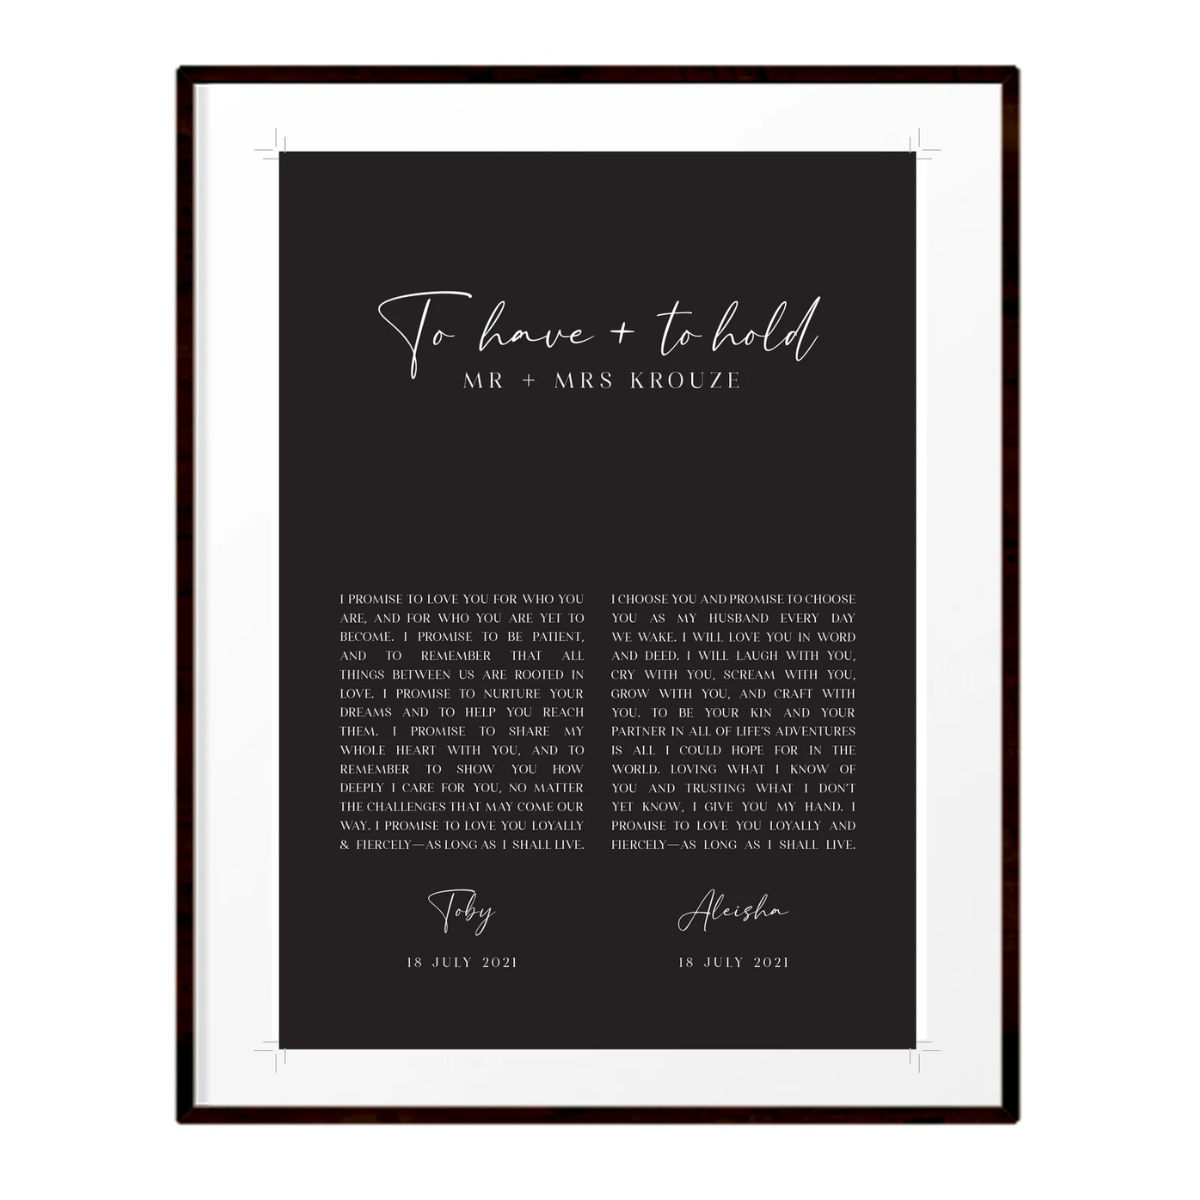 25. Capture the Love Forever: Personalized Wedding Vows Print - A Unique Anniversary Gift Idea